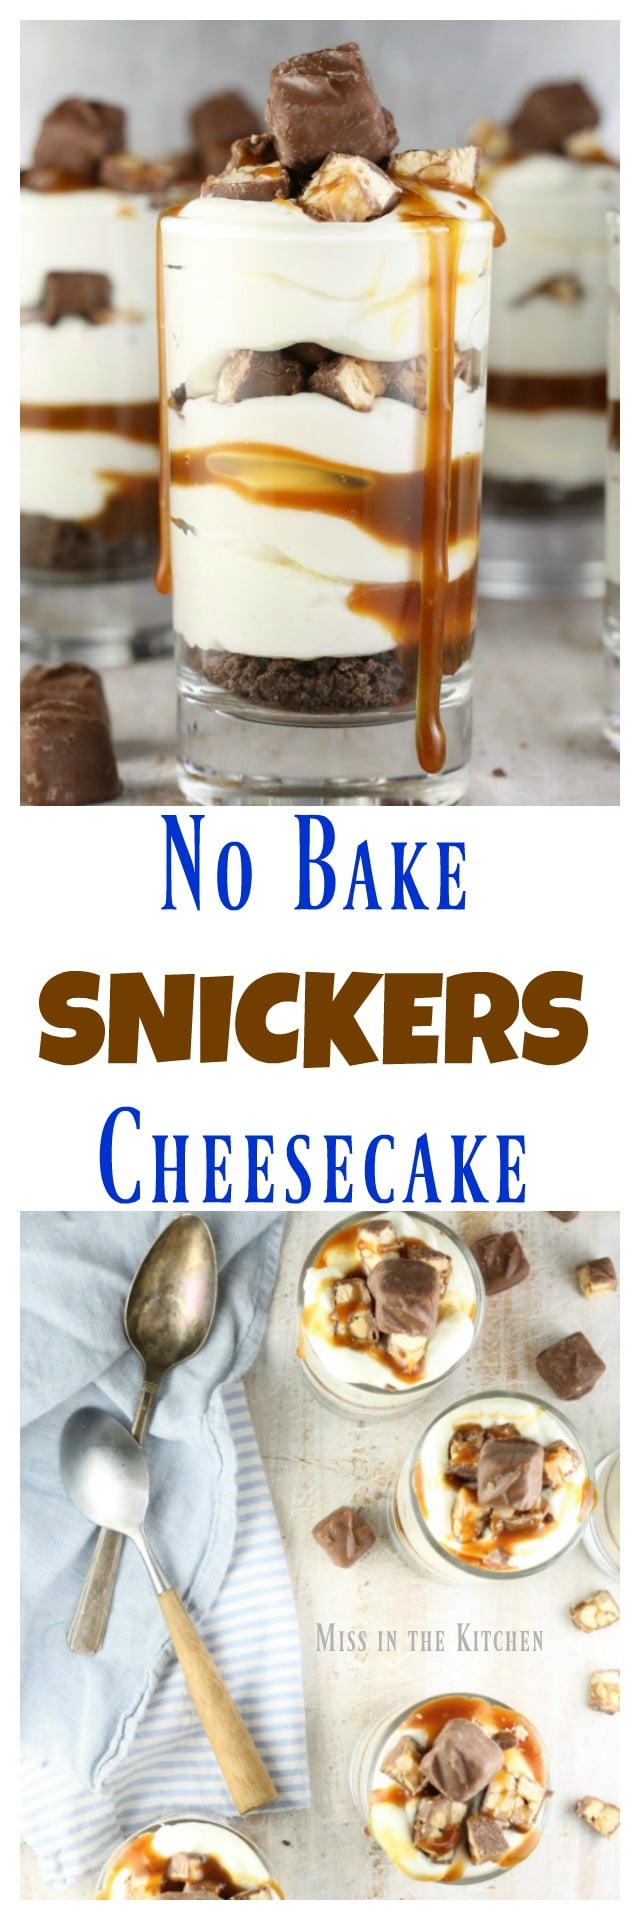 No Bake Snickers Cheesecake is one of the easiest desserts to make. Perfect for any night of the week or great for entertaining. Get the recipe at MissintheKitchen.com